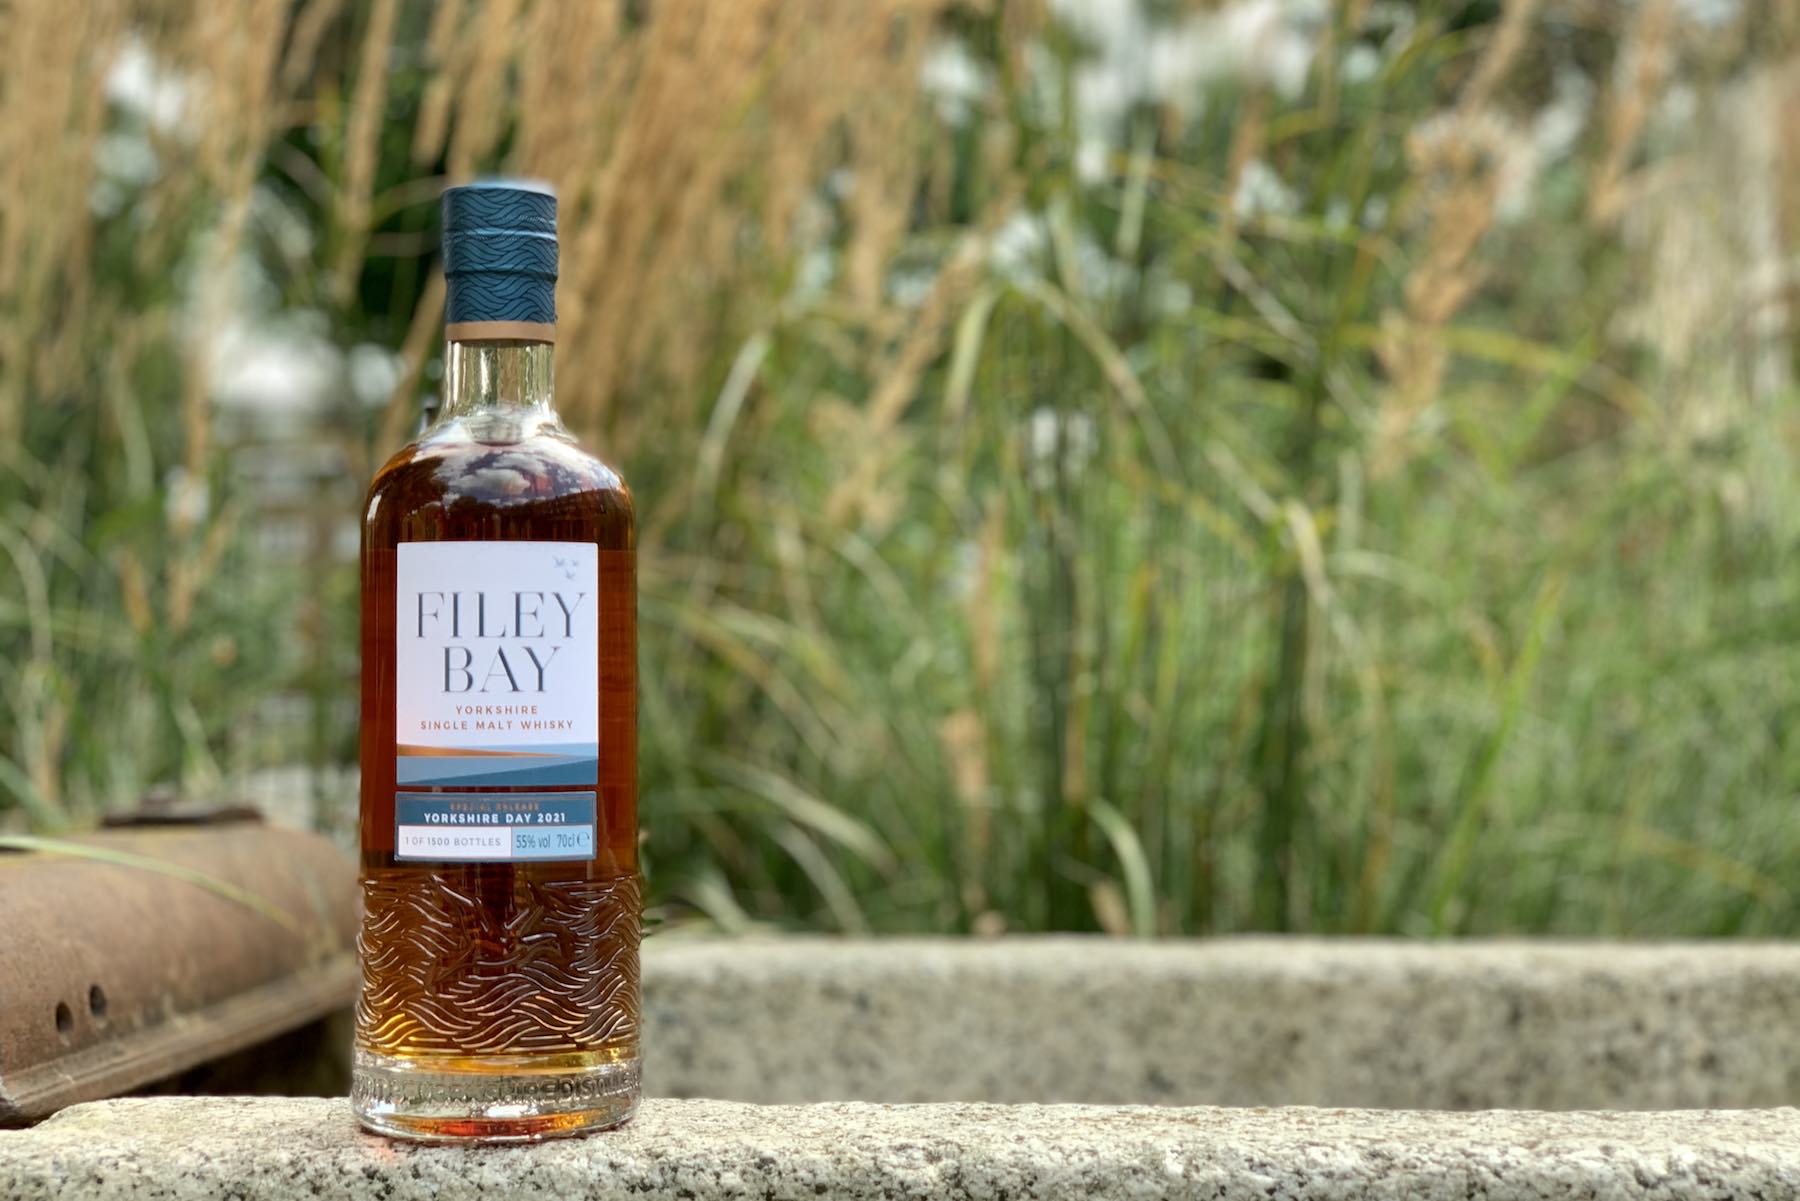 Filey Bay Yorkshire Day 2021 from Spirit Of Yorkshire Distillery, Whisky Review and Tasting Notes